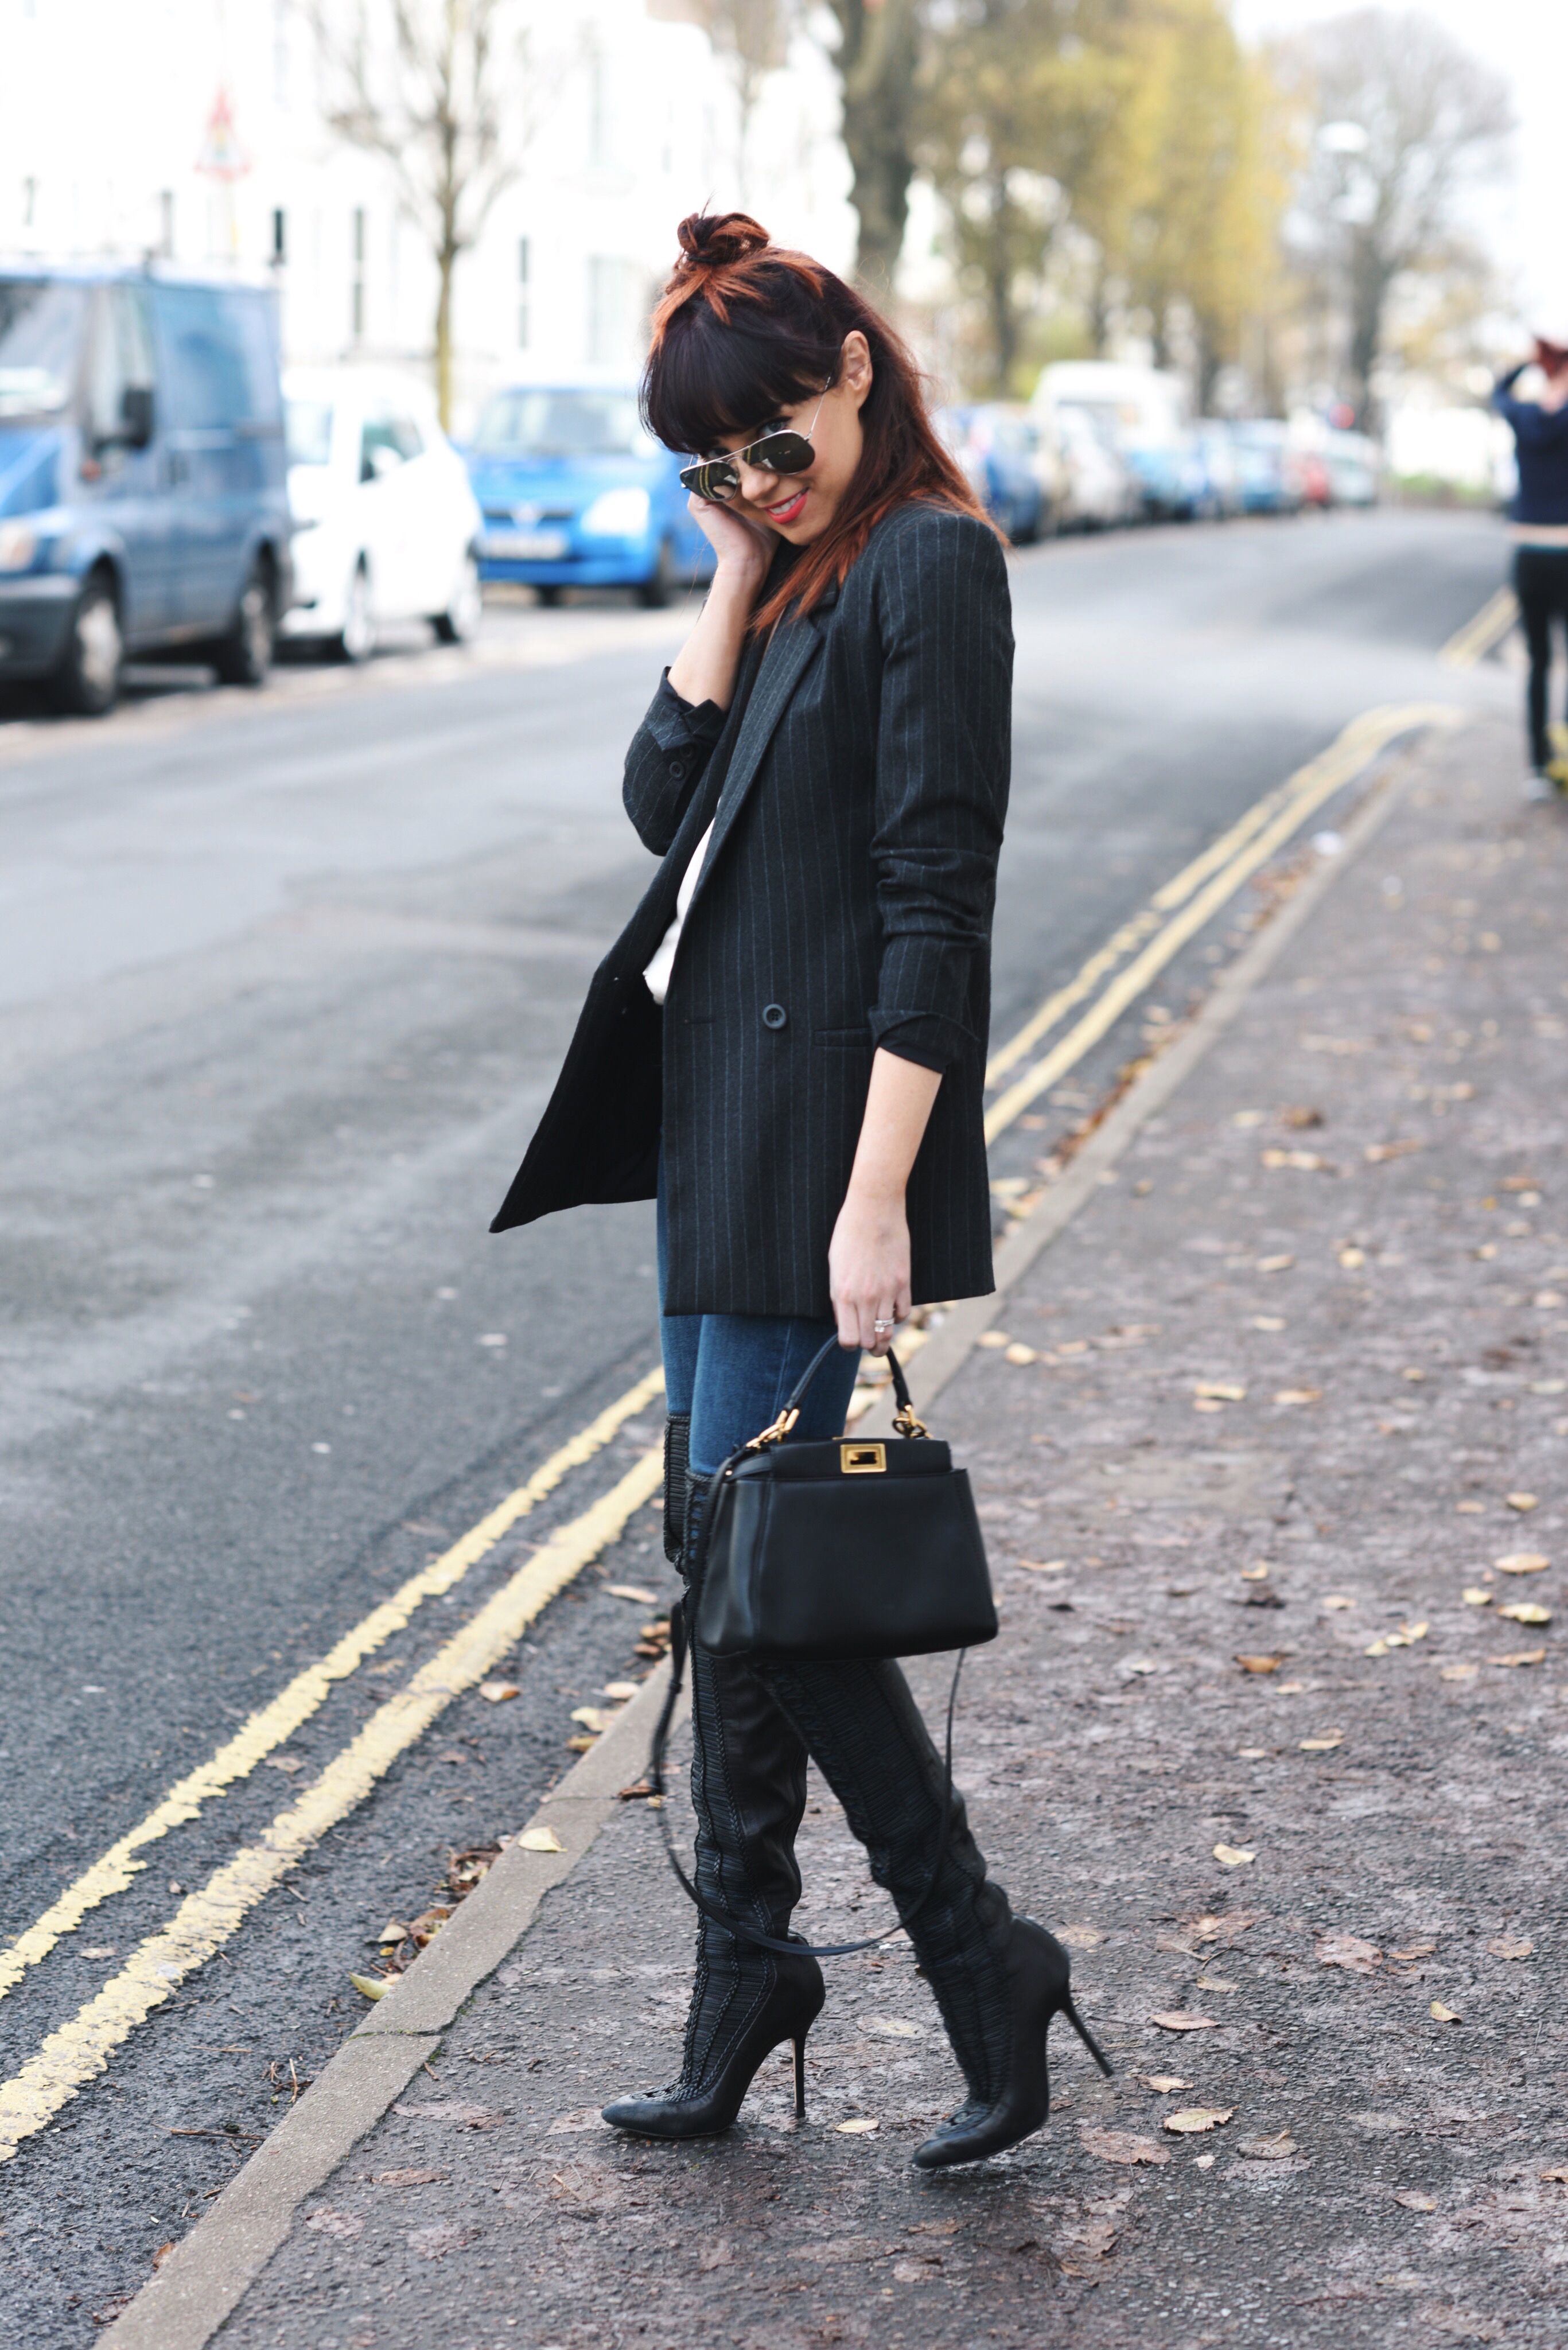 pinstripe jacket and over the knee boots